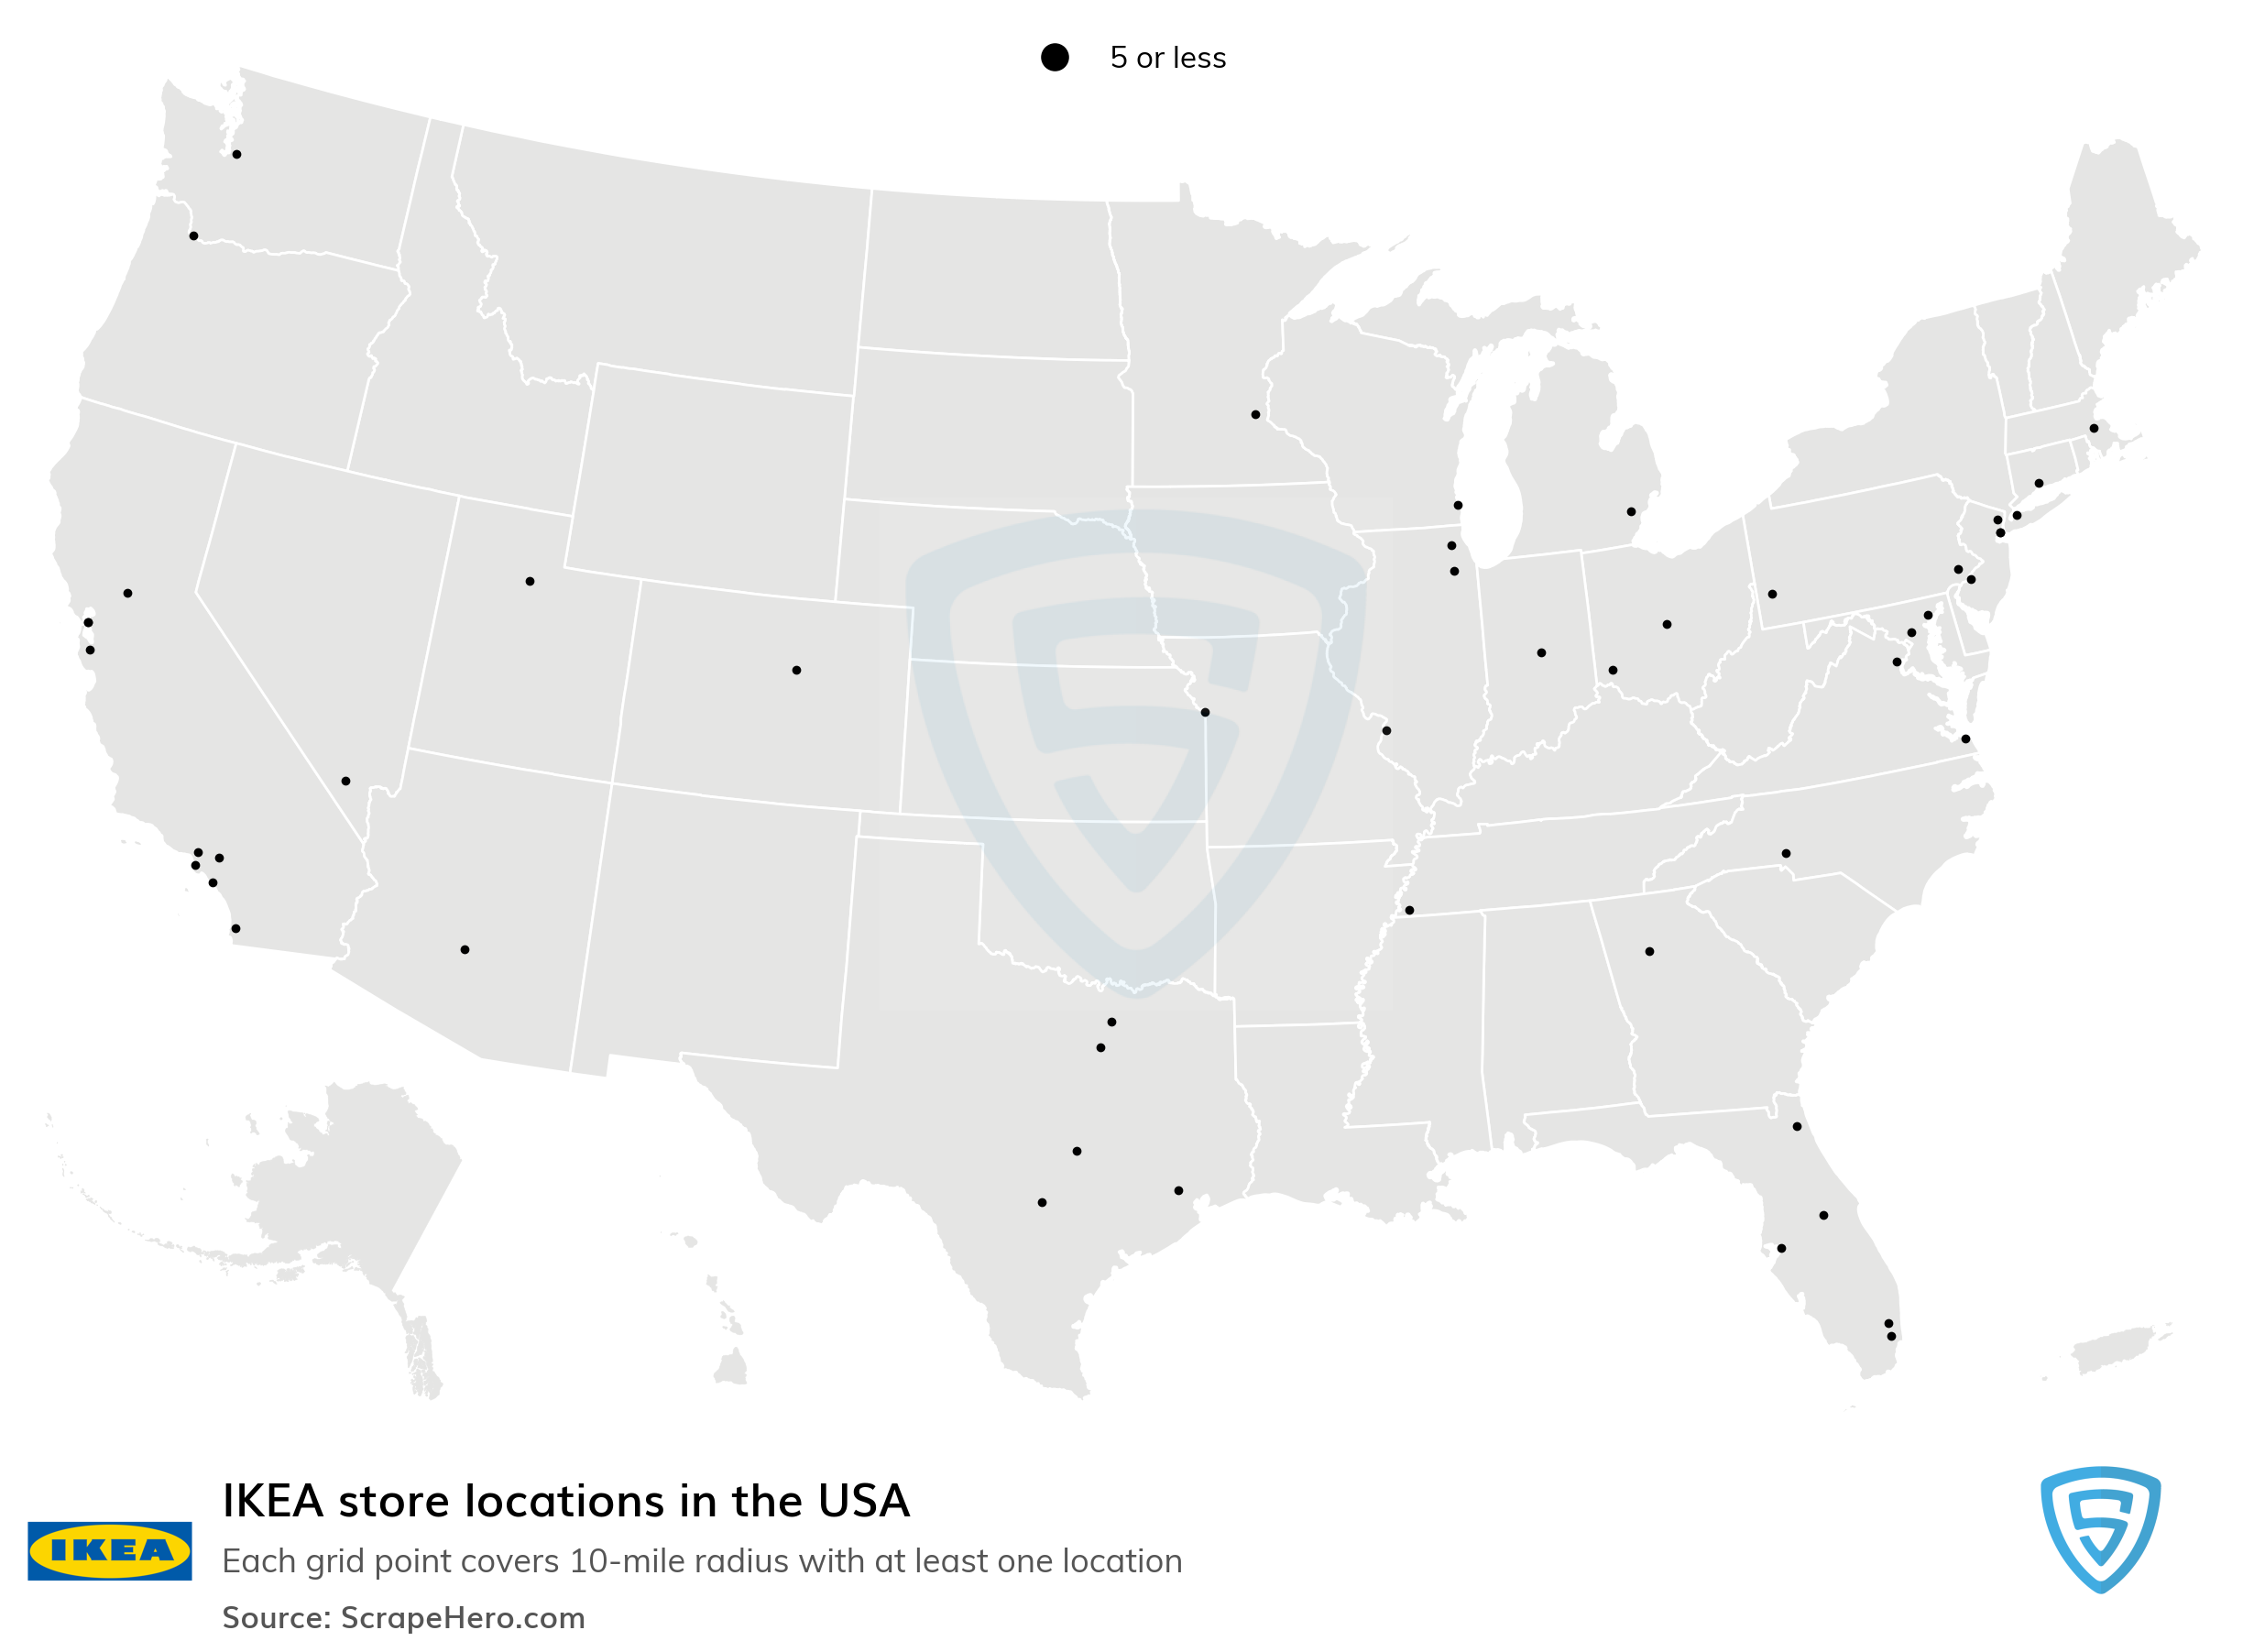 Charmant Zeep toilet Number of IKEA locations in the USA in 2023 | ScrapeHero